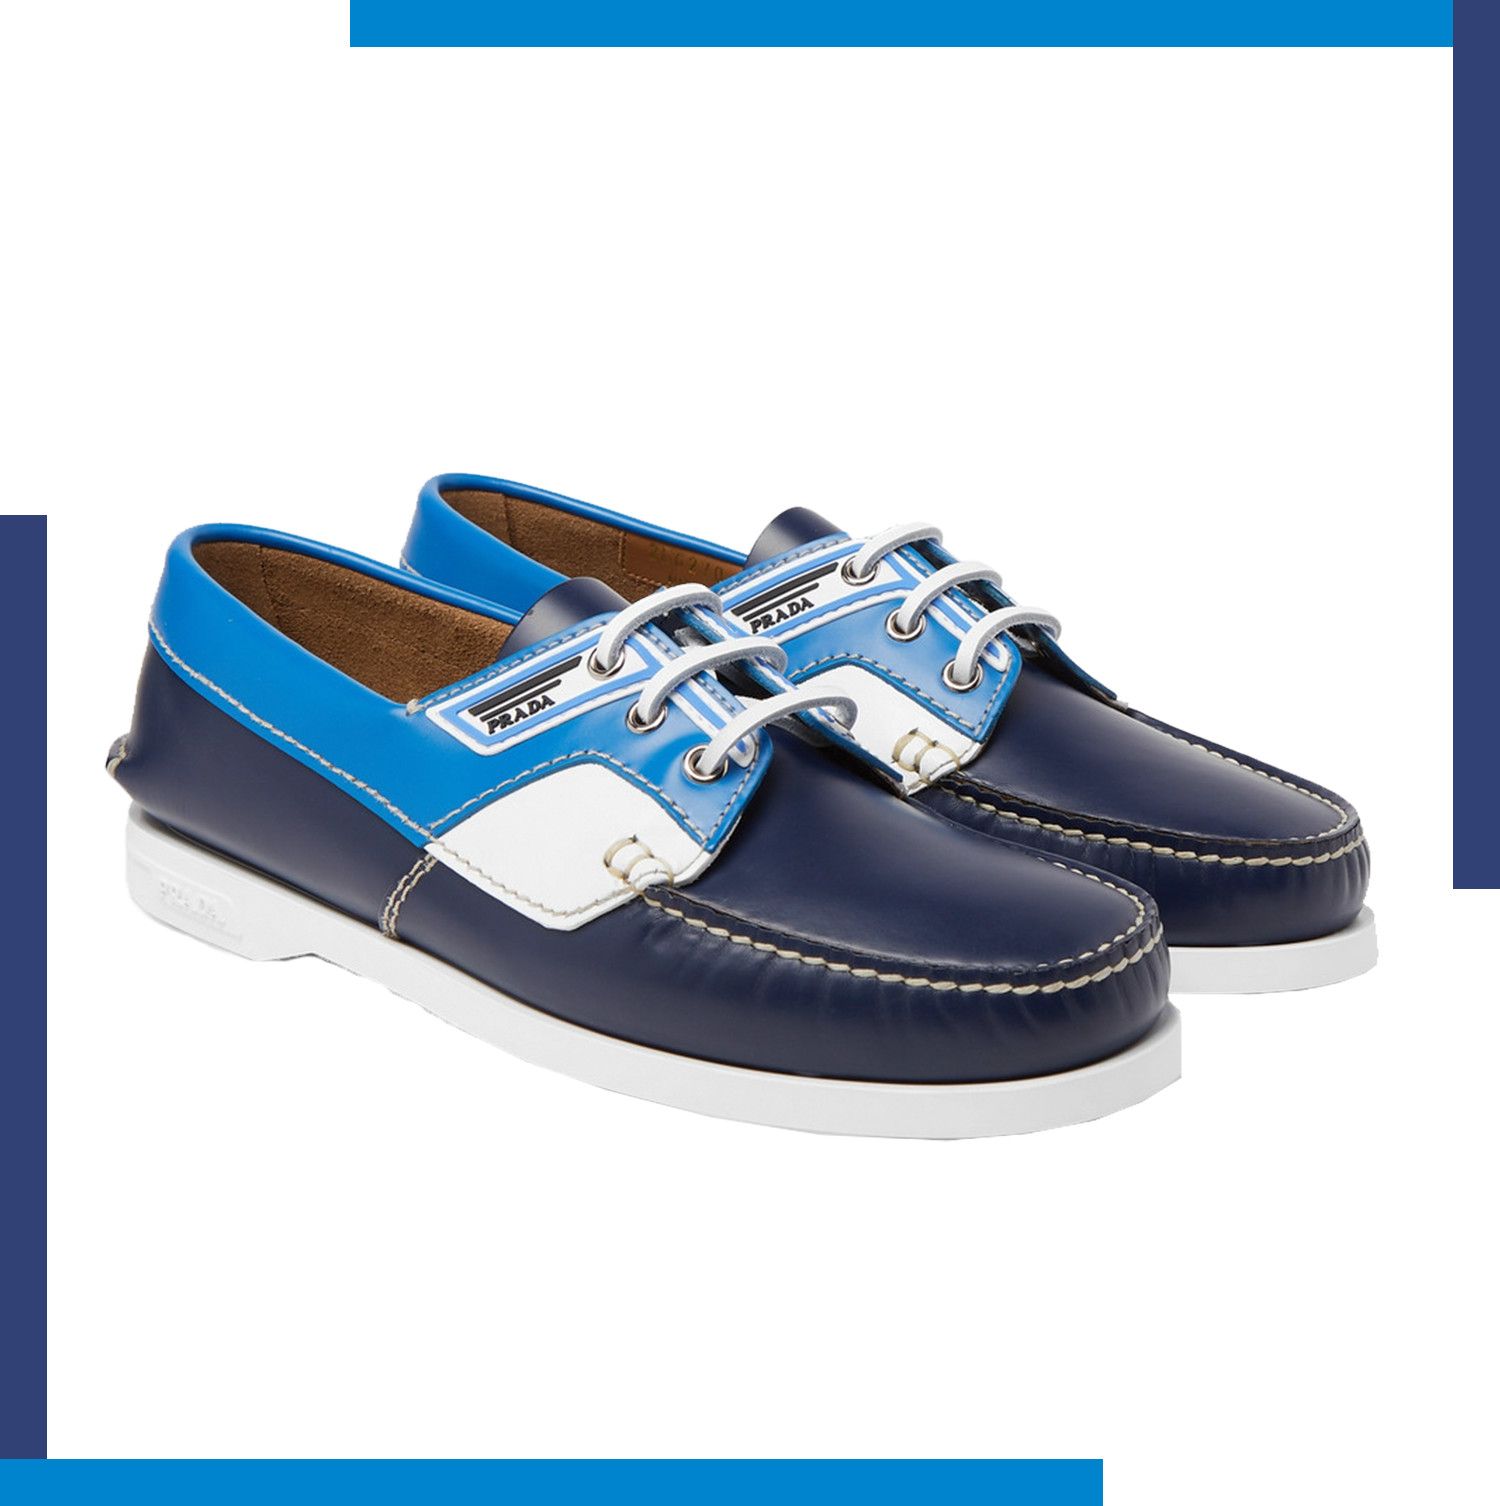 Boat Shoes Trend, Explained - Why Boat Shoes Are Back in Style in 2019